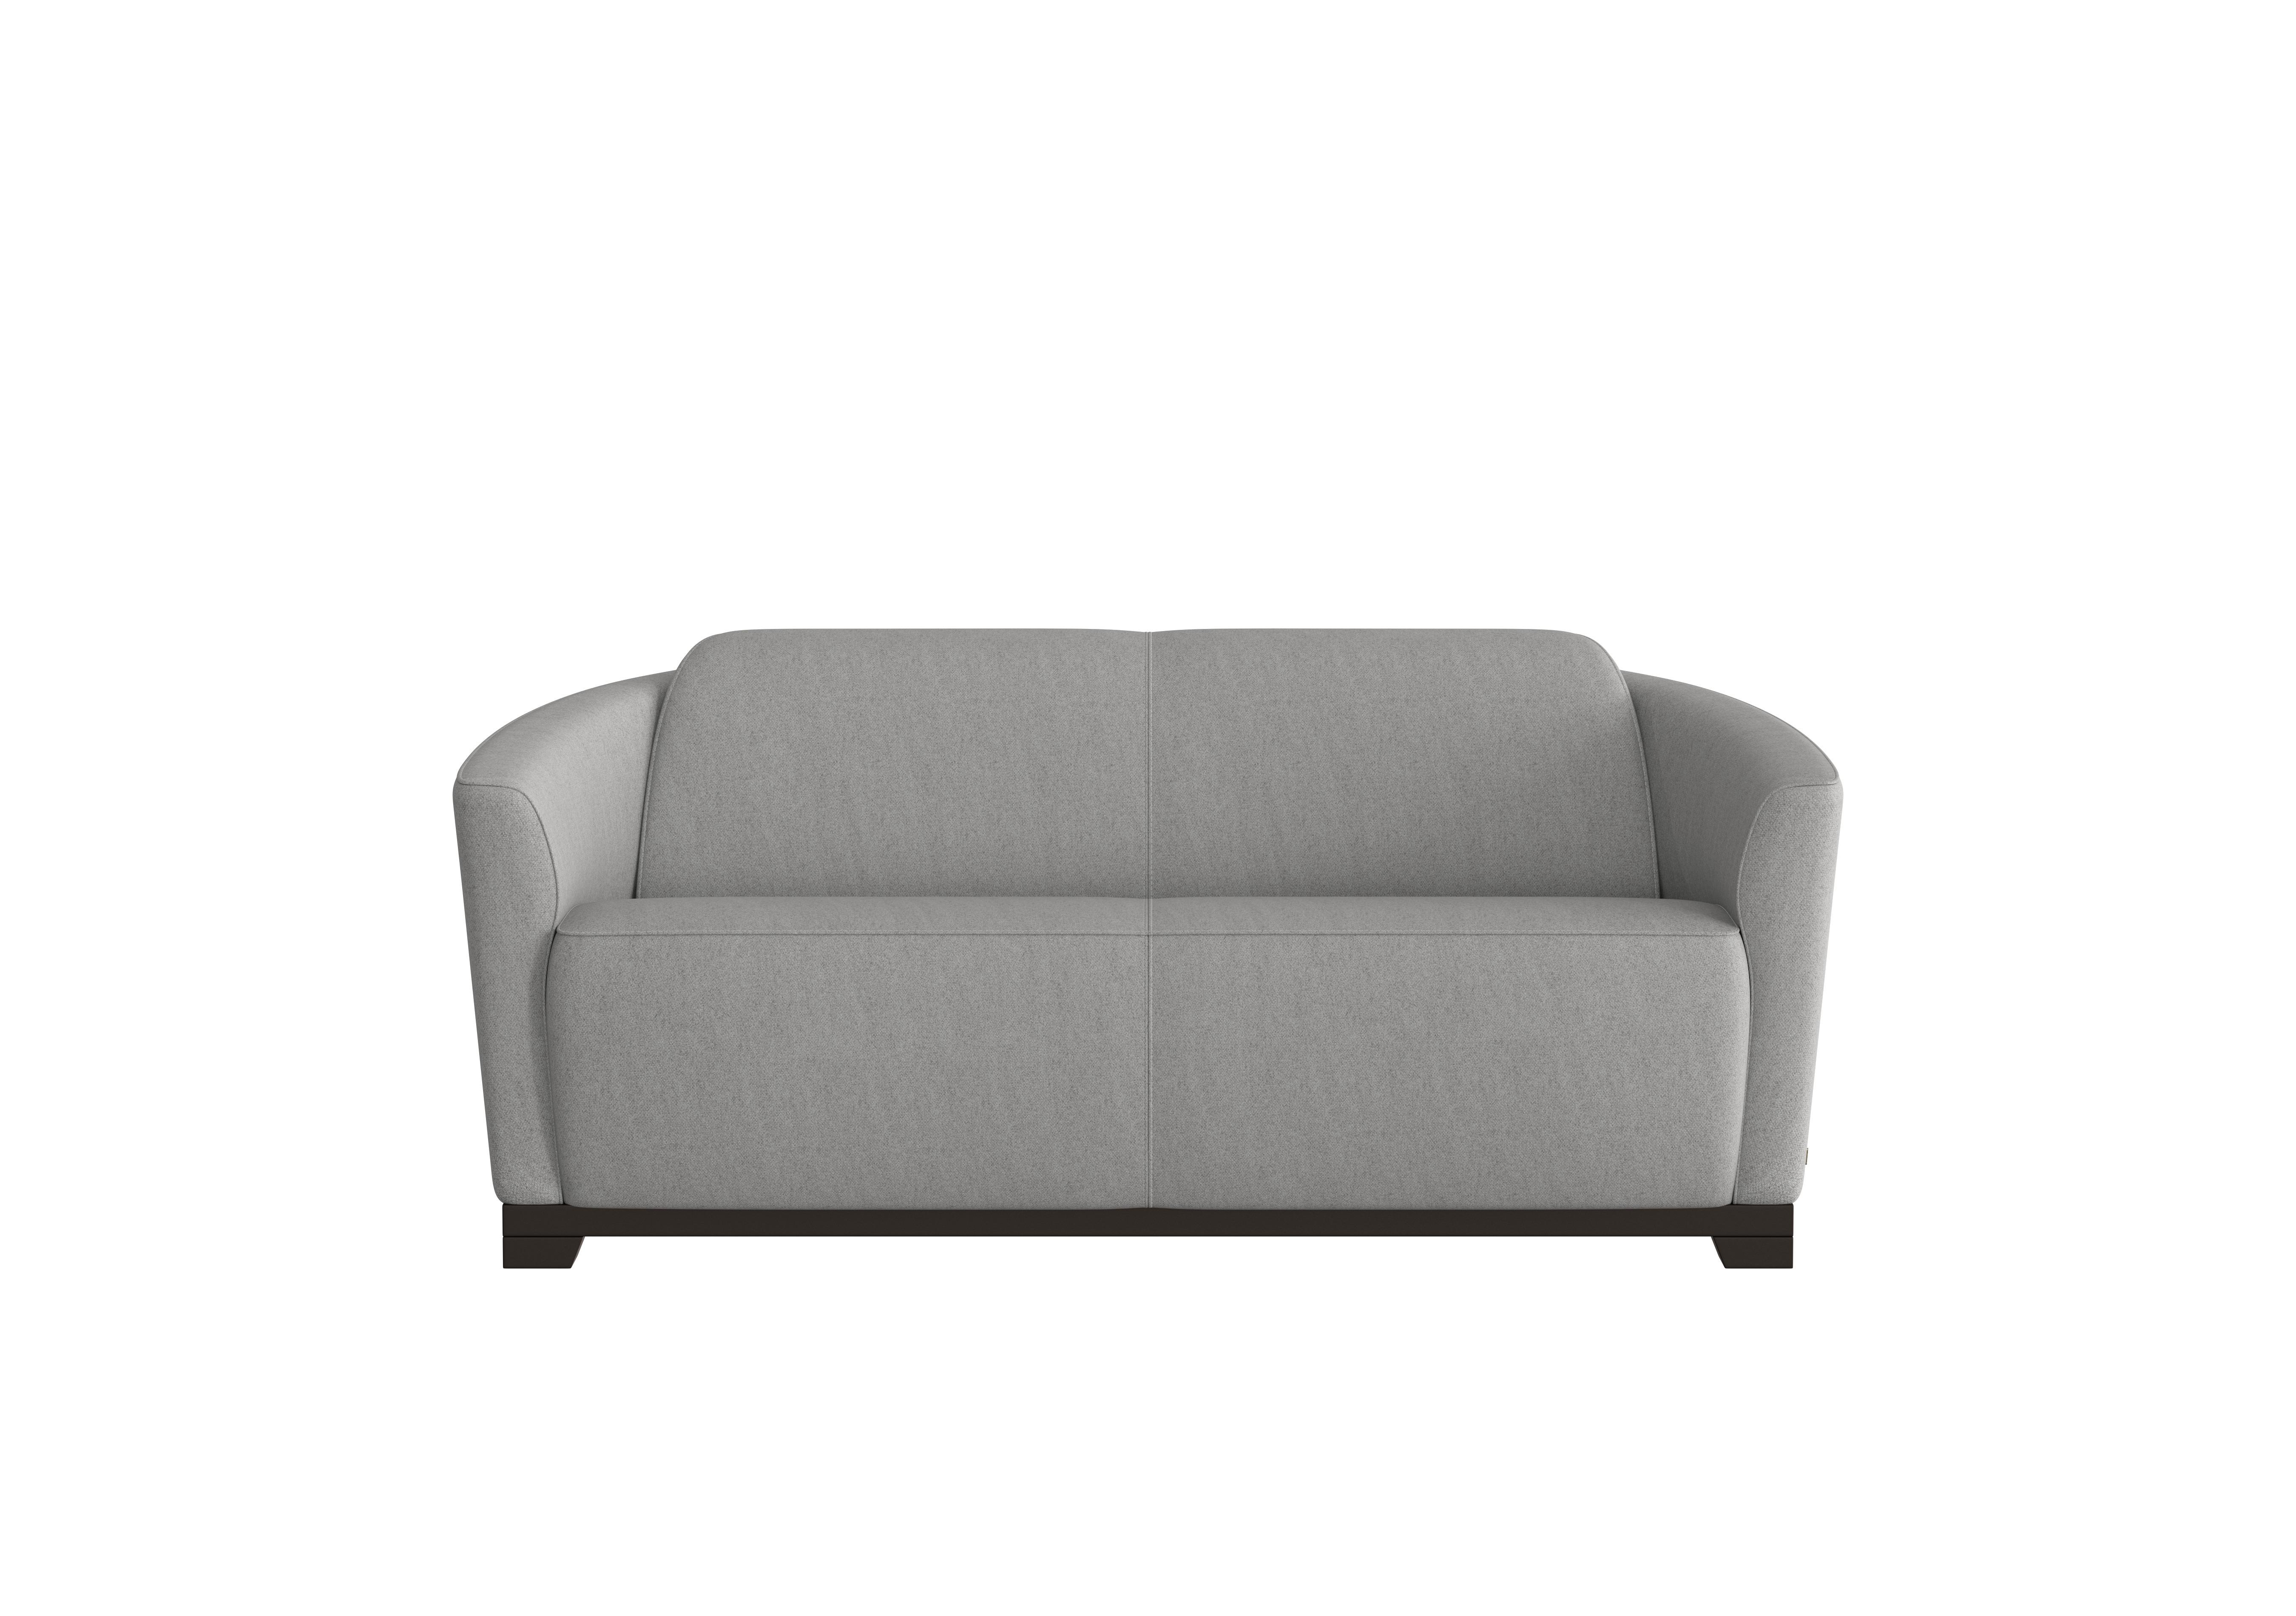 Ketty 2.5 Seater Fabric Sofa in Fuente Ash on Furniture Village